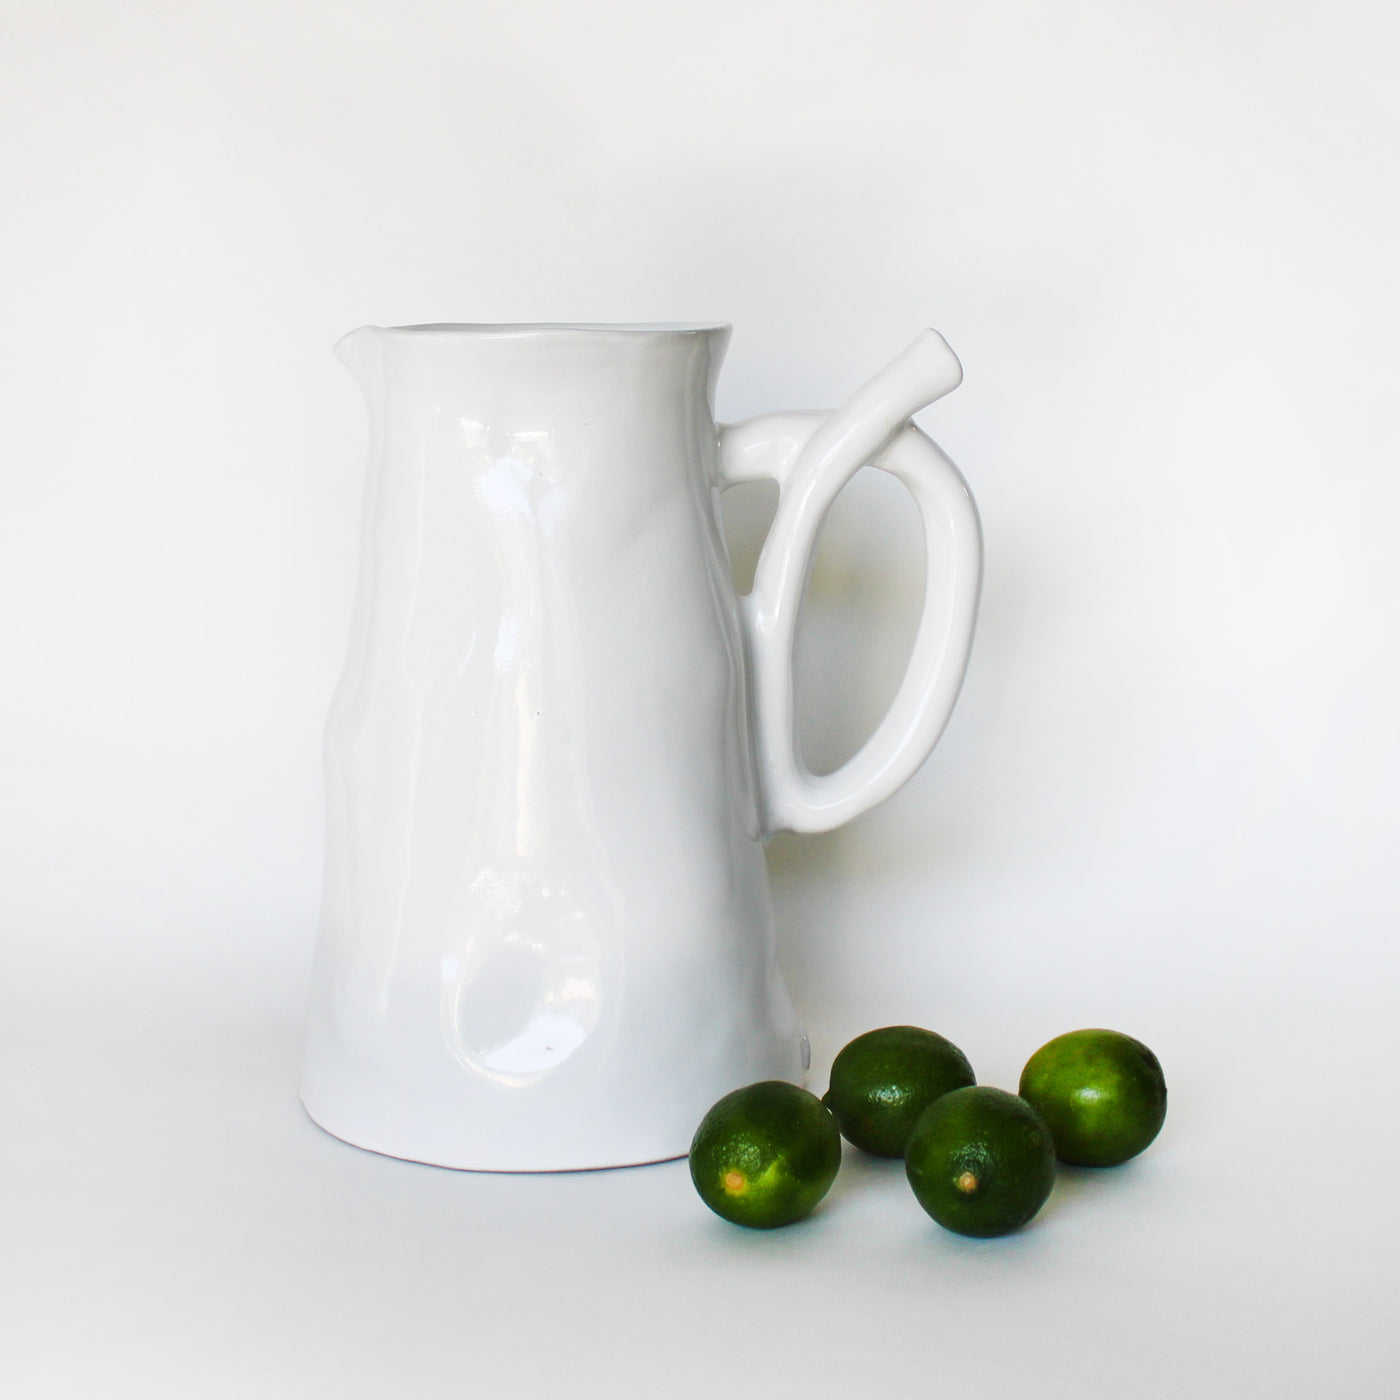 Pitcher 971 by Montes Doggett